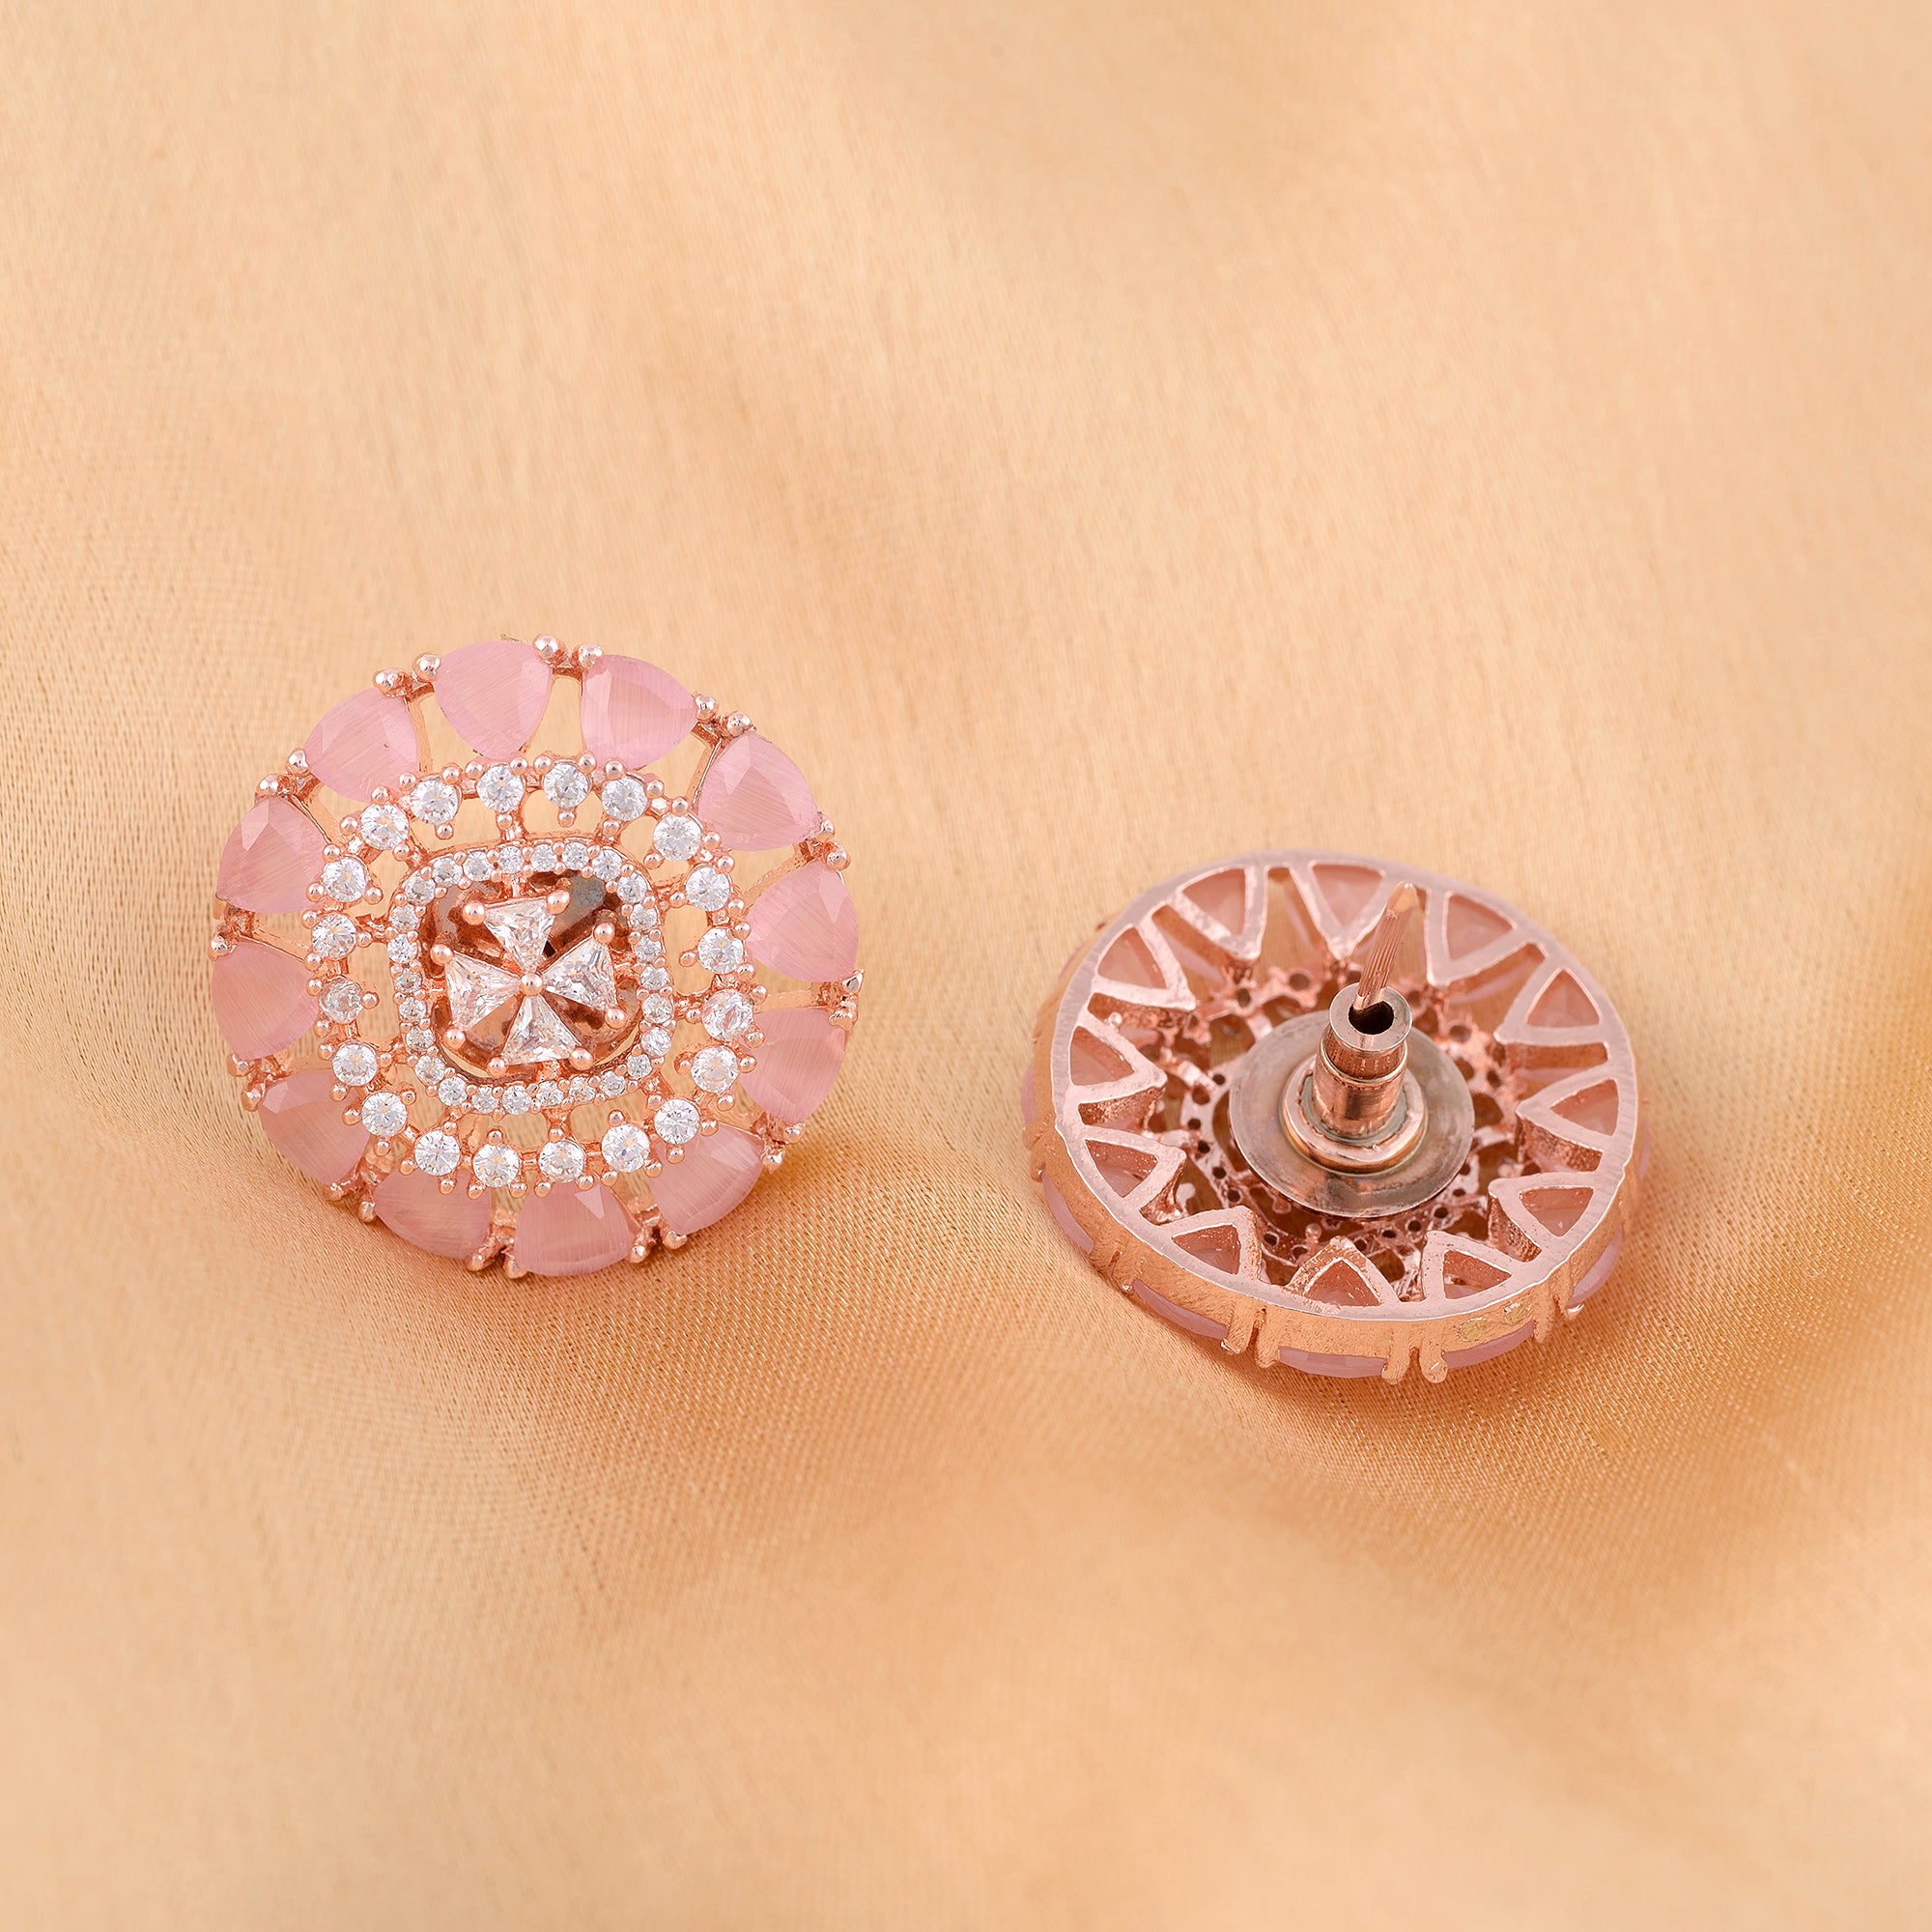 Subtle Light Pink Tops Rose Quatz Studs Ad Handcrafted Rose Gold Plated Earrings for Women and Girls - Saraf RS Jewellery